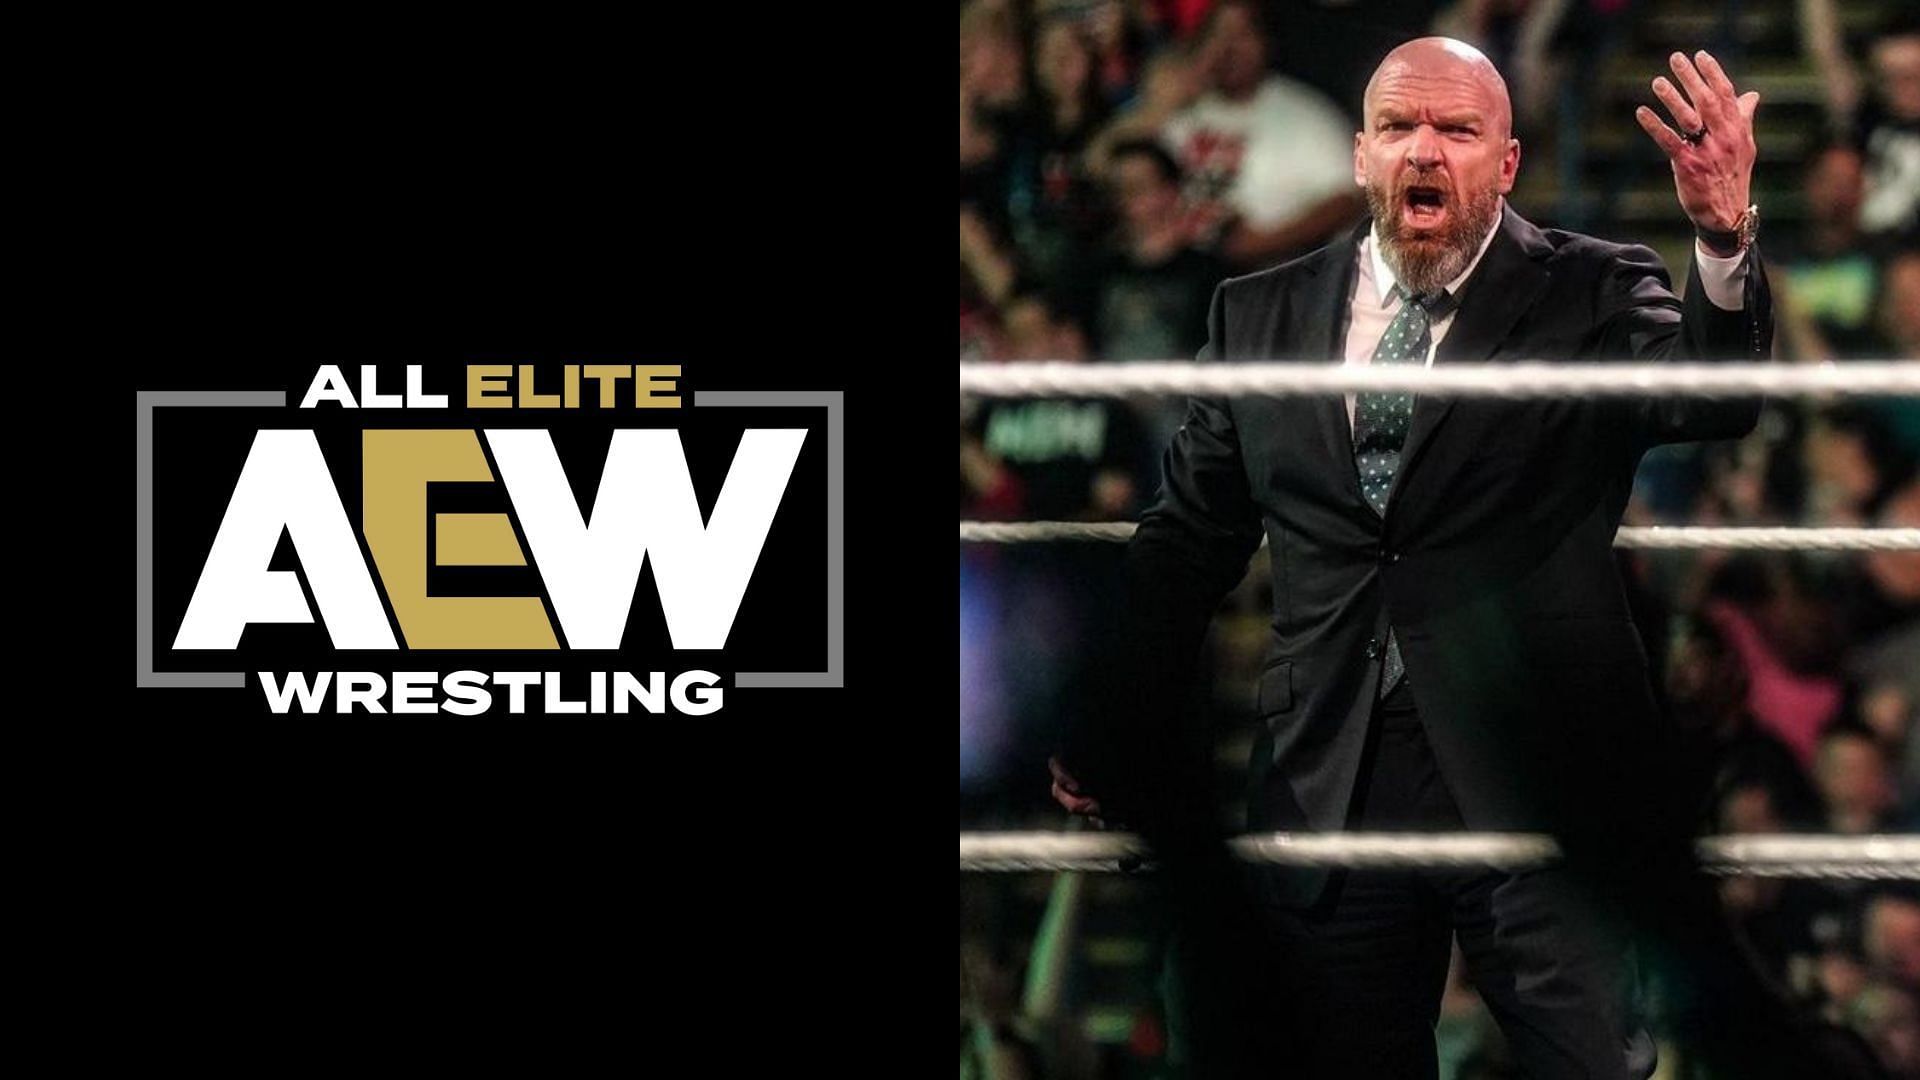 All Elite Wrestling is a Jacksonville-based promotion led by Tony Khan and Triple H is the chief content officer of WWE